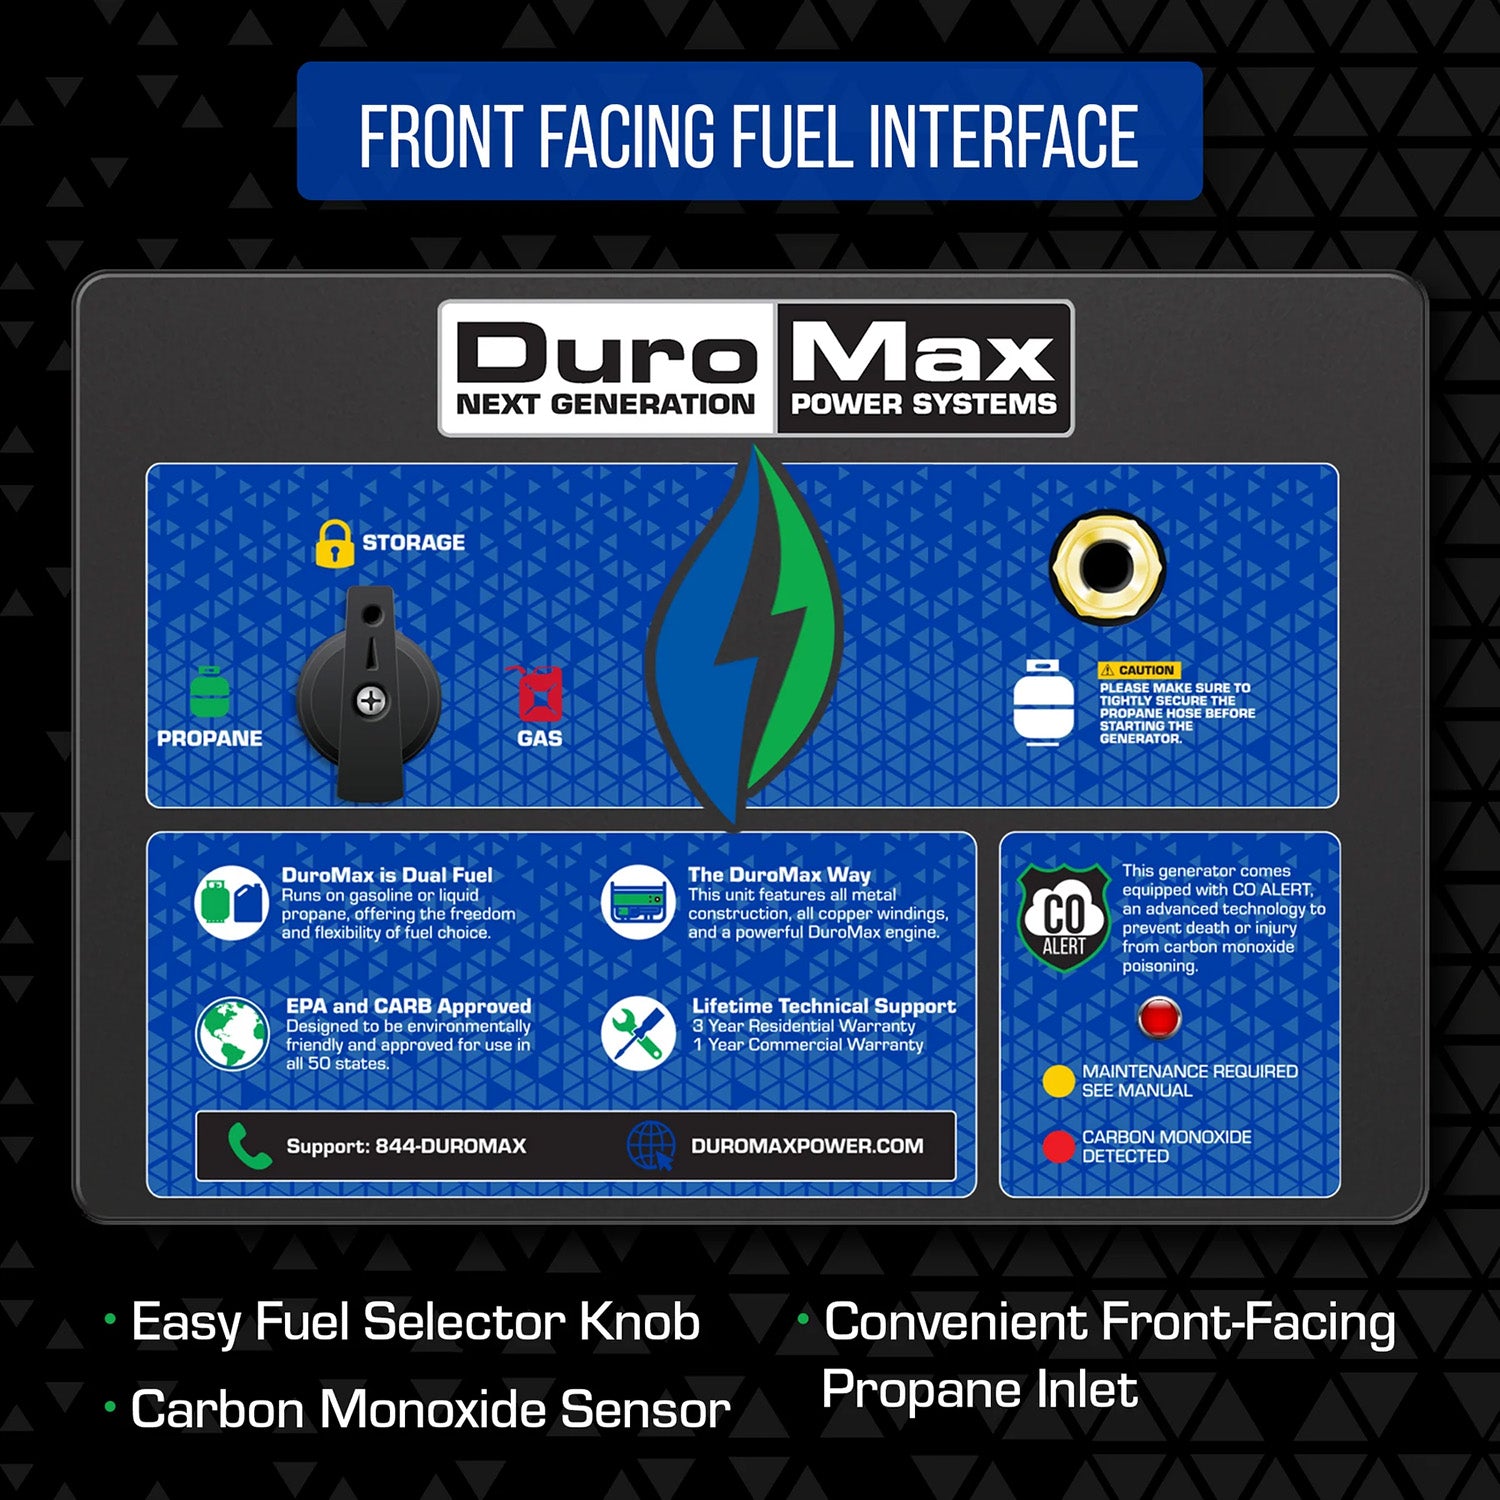 DuroMax XP12000HX Dual Fuel Portable HX Generator Has a Front Facing Fuel Interface